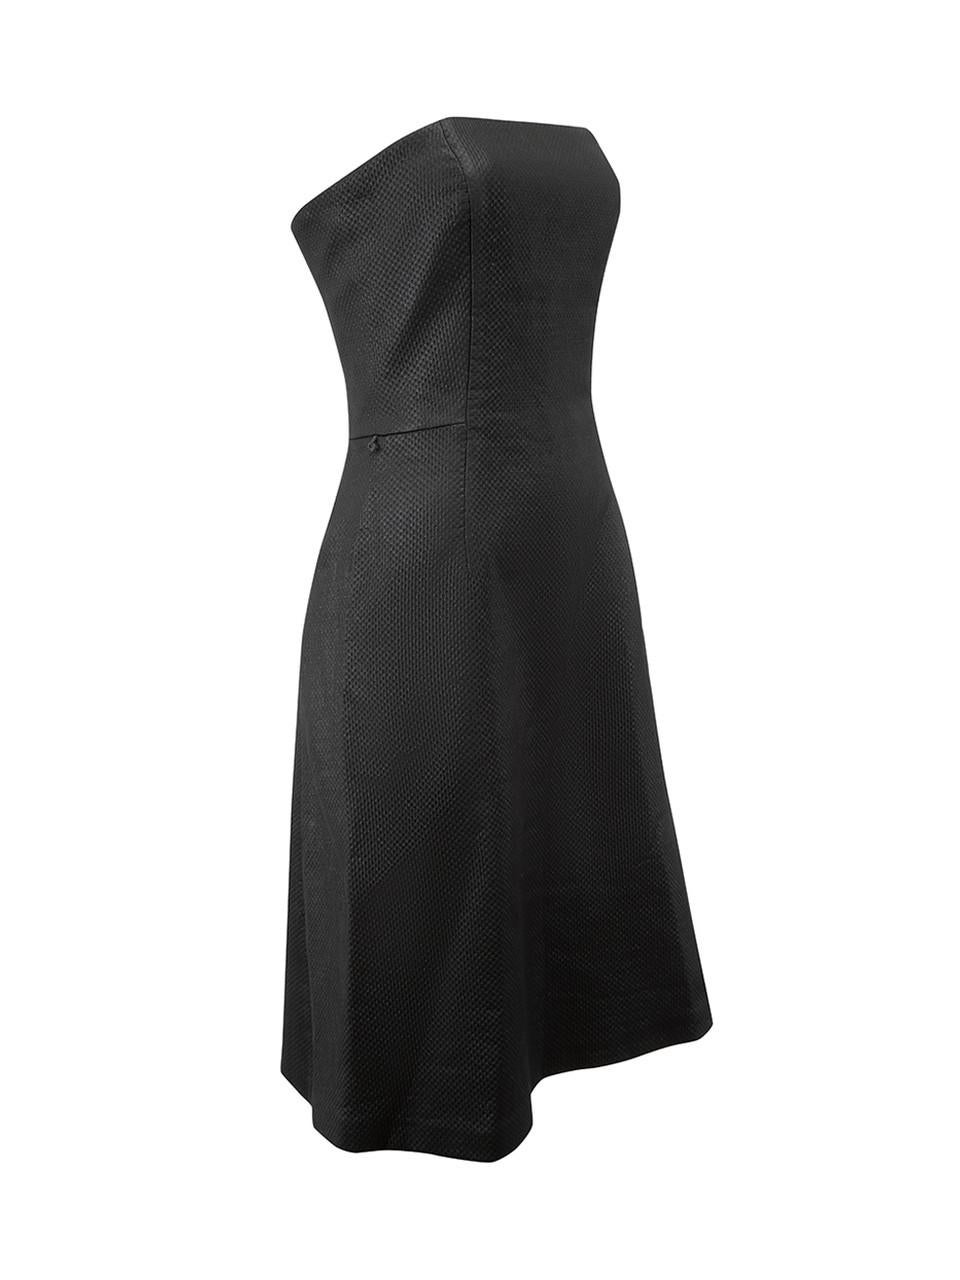 CONDITION is Very good. Hardly any visible wear to dress is evident. Missing belt on this used Max Mara designer resale item.
 
Details
Vintage
Black
Polyester
Mini dress
Textured
Strapless
Back zip closure with hook and eye

Made in Italy
